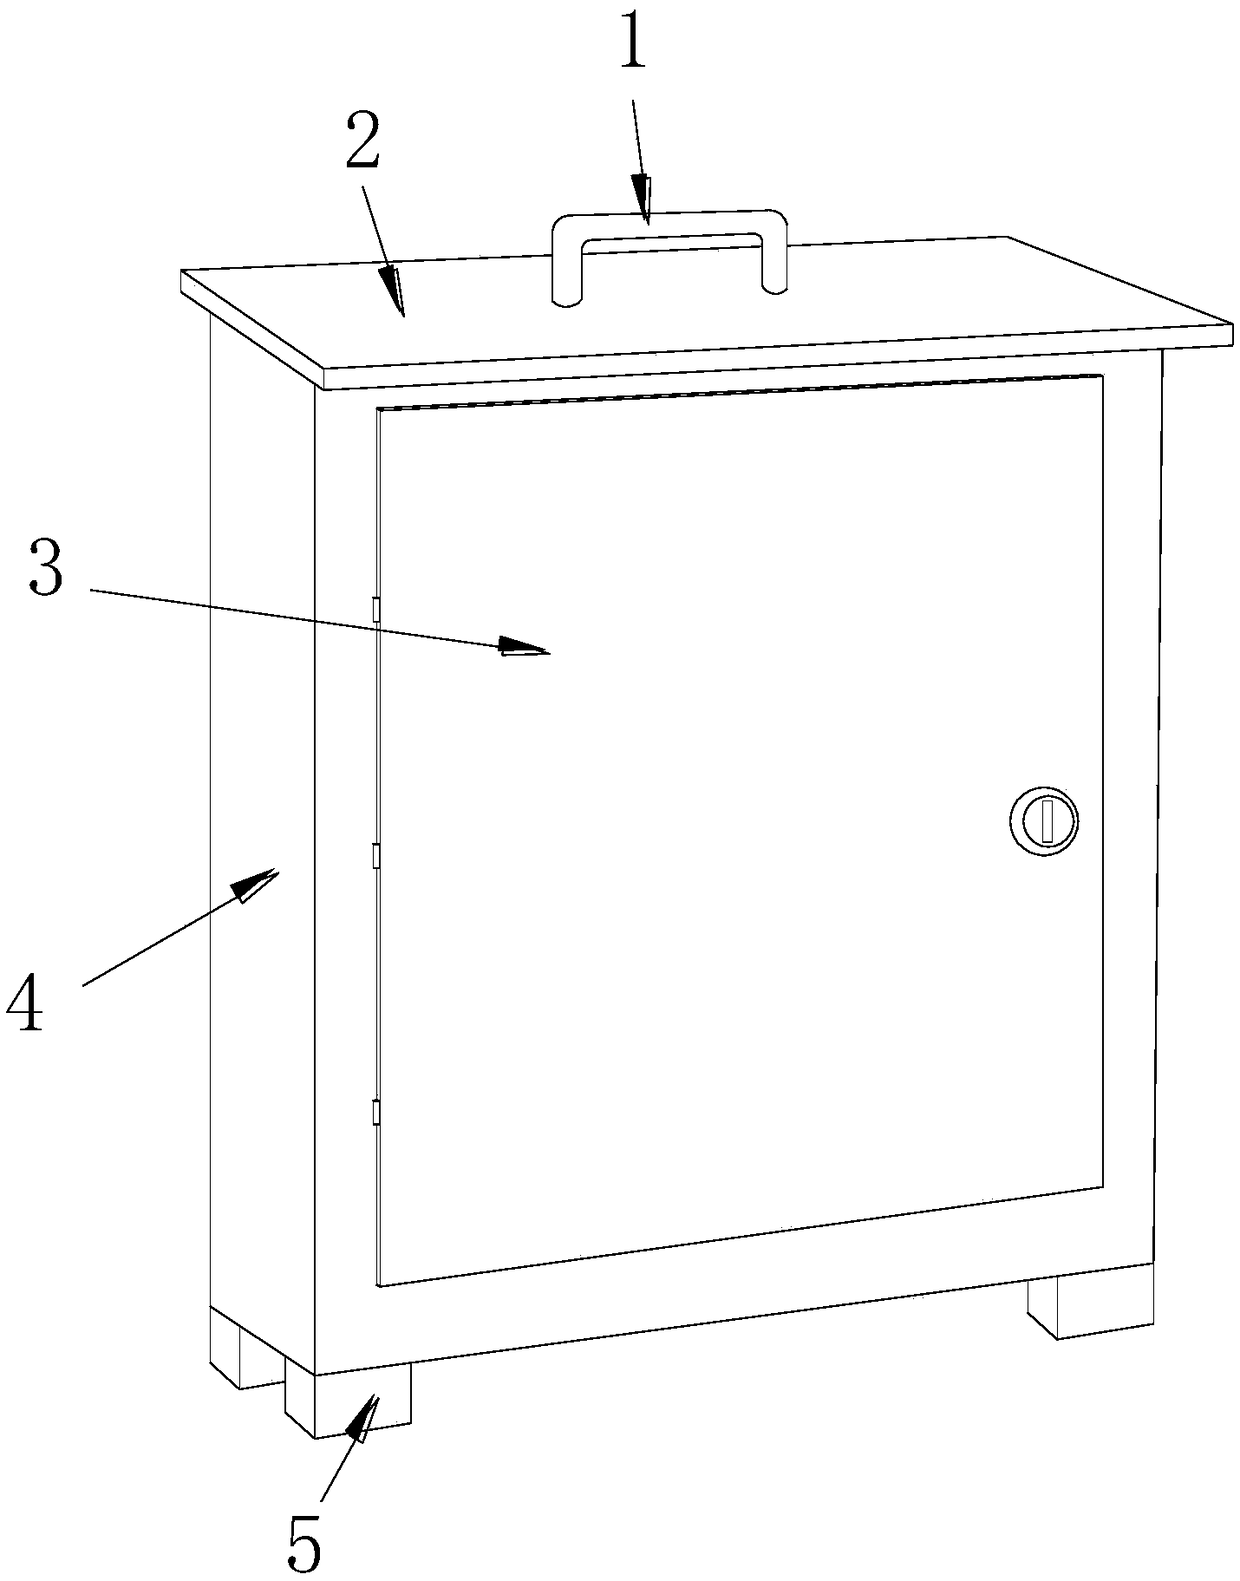 An instrument and meter distribution box for controlling termites according to their biological characteristics